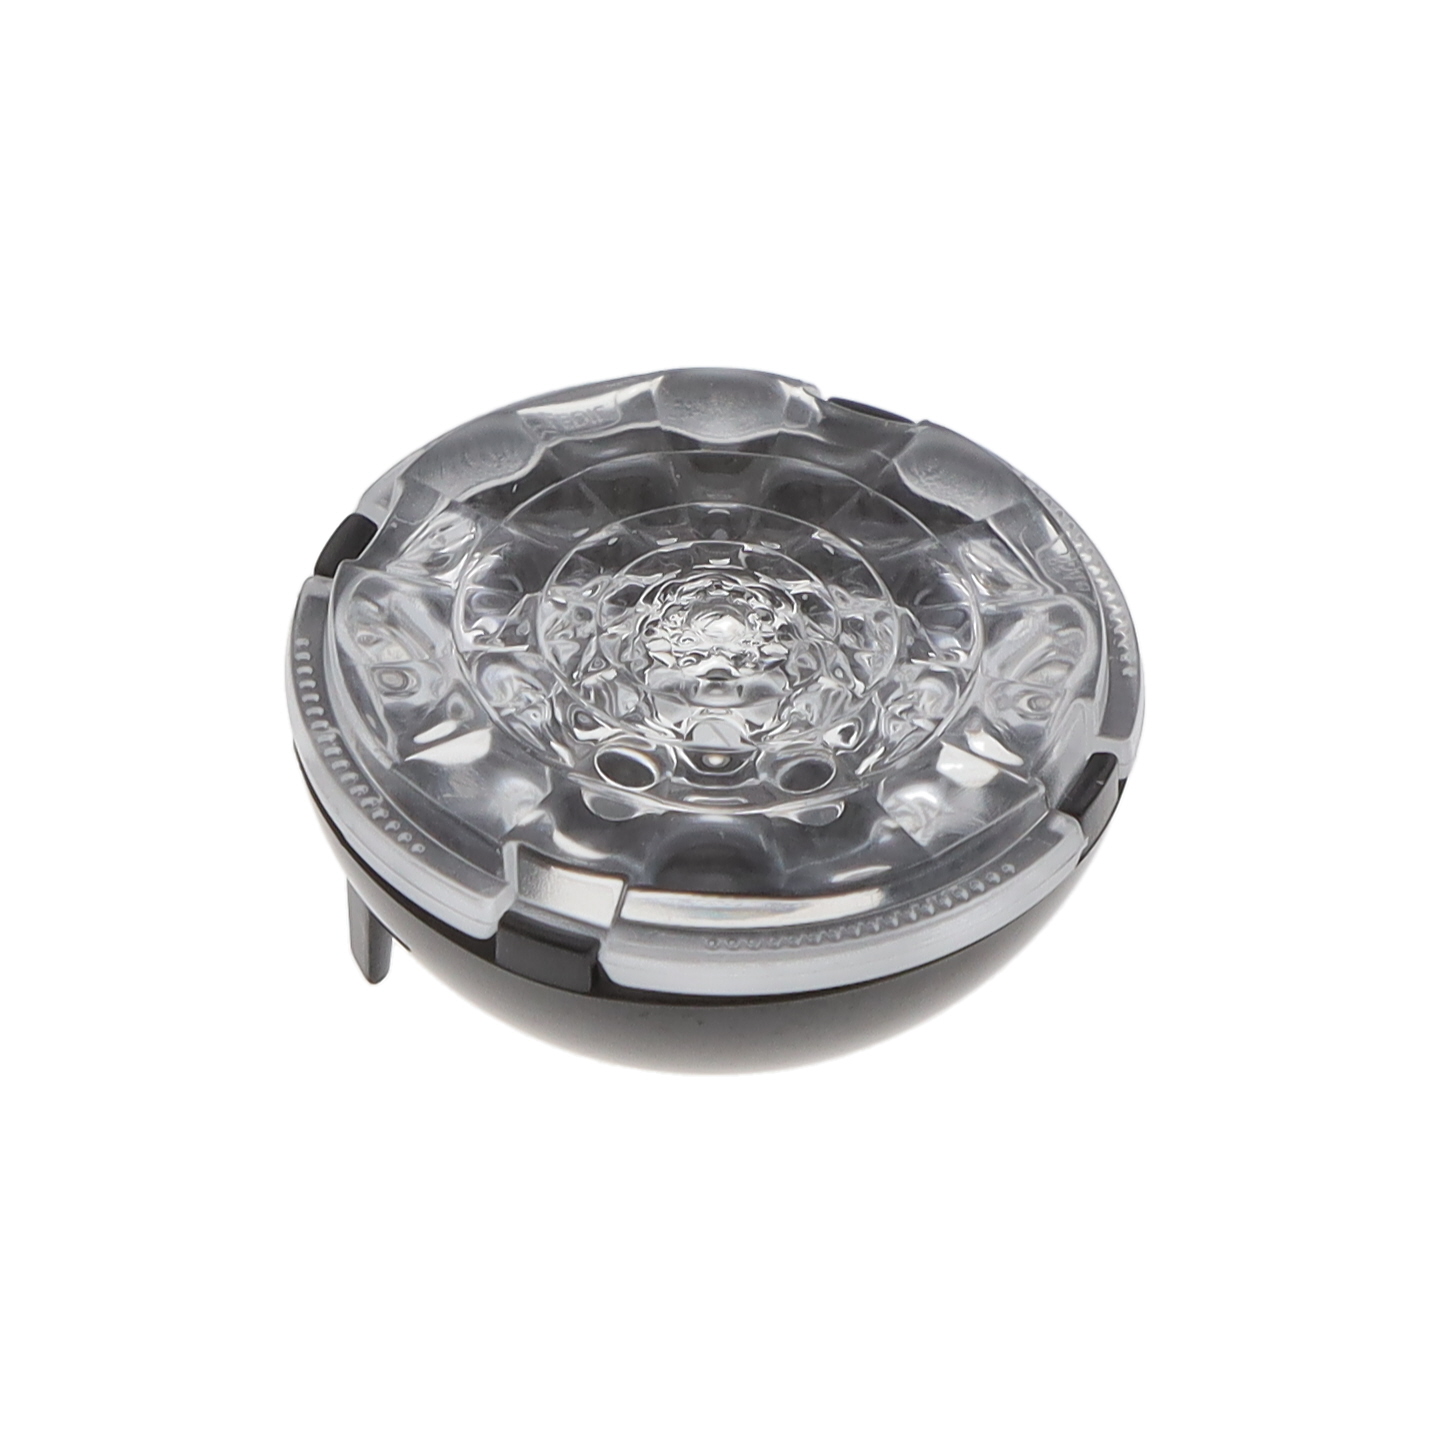 【CA18549_AMY-25-ZOOM】ASSEMBLY1 POS25.0MM (D)10.00MM(H